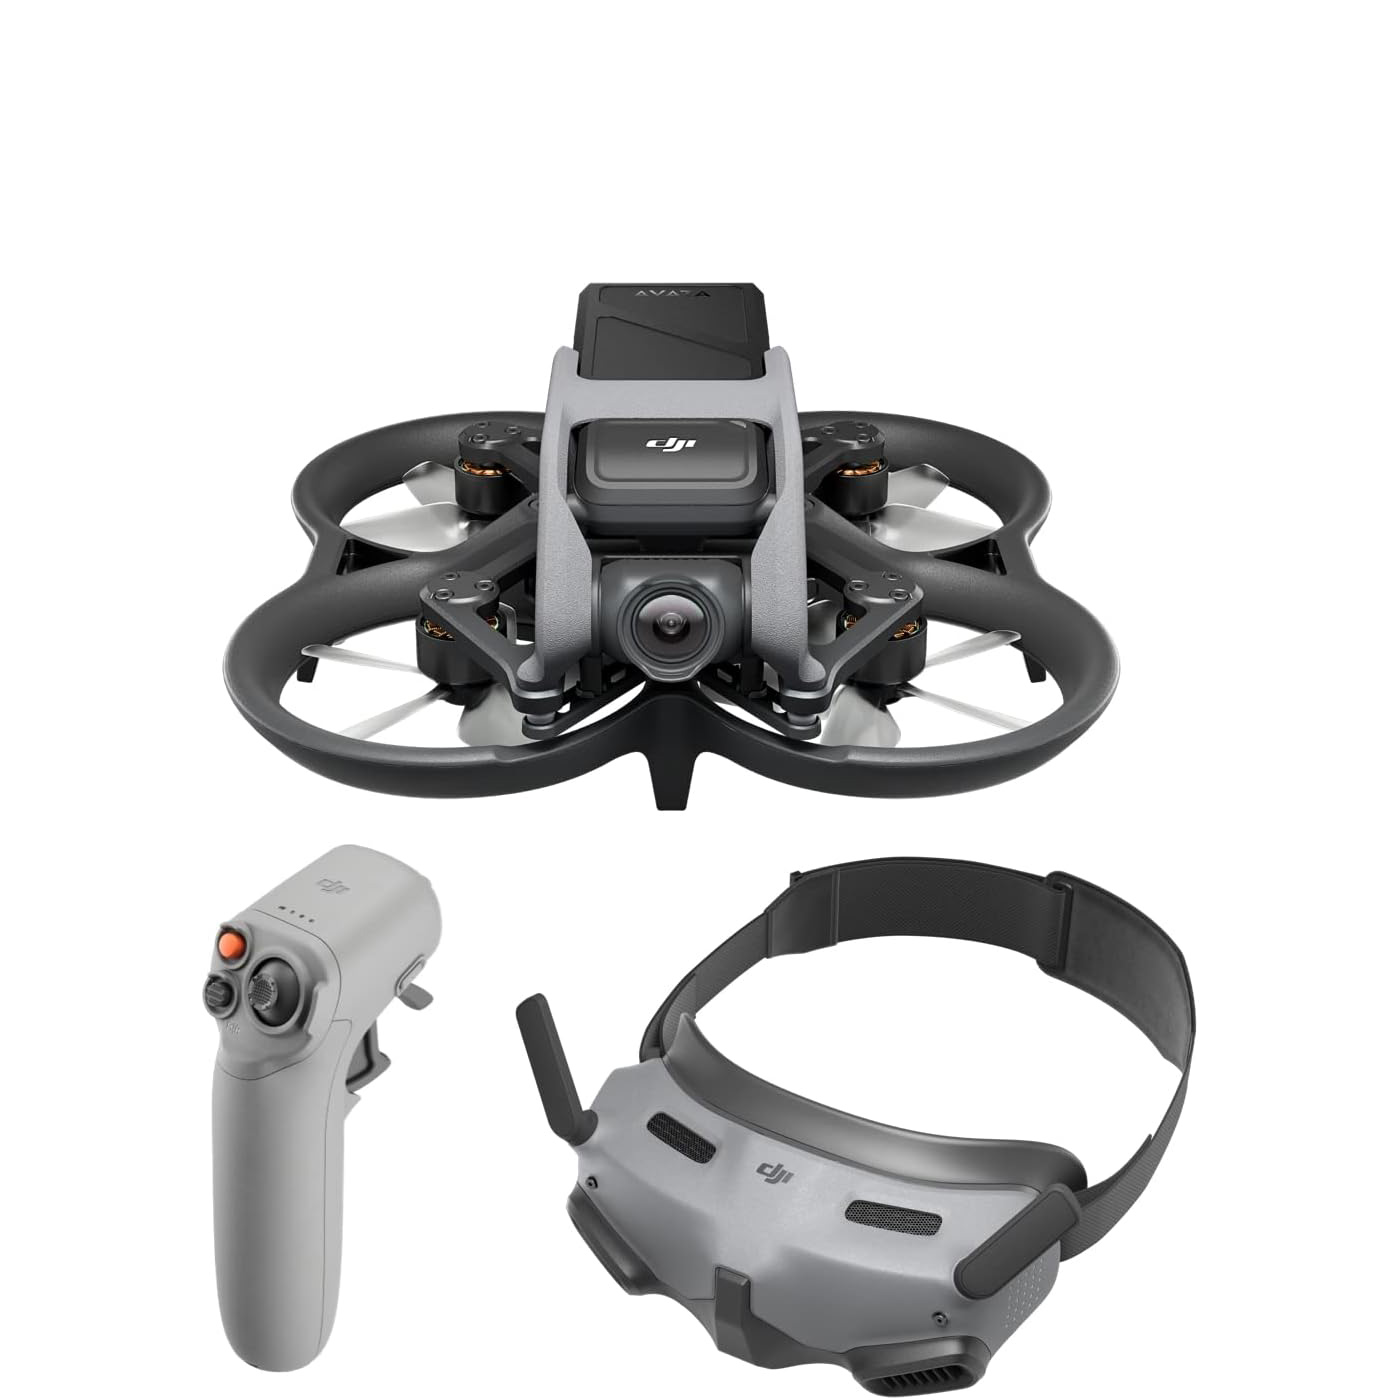 DJI Avata with controller and goggles on white background